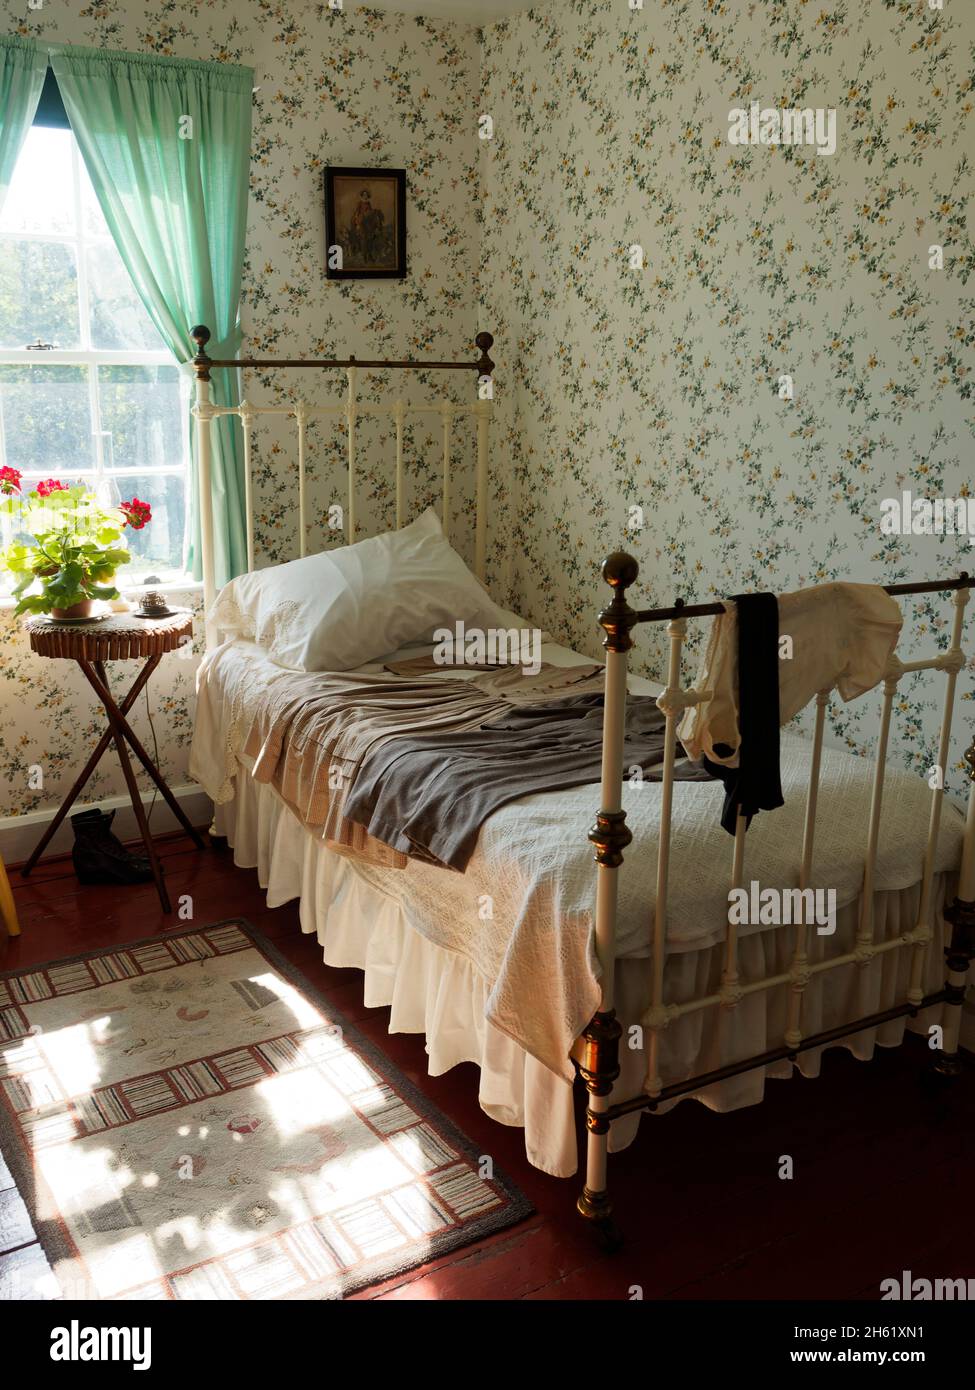 anne of green gables',anne of green gables heritage place,anne's bedroom,author lucy maude montgomery,canada,fictional story,interior,prince edward island Stock Photo